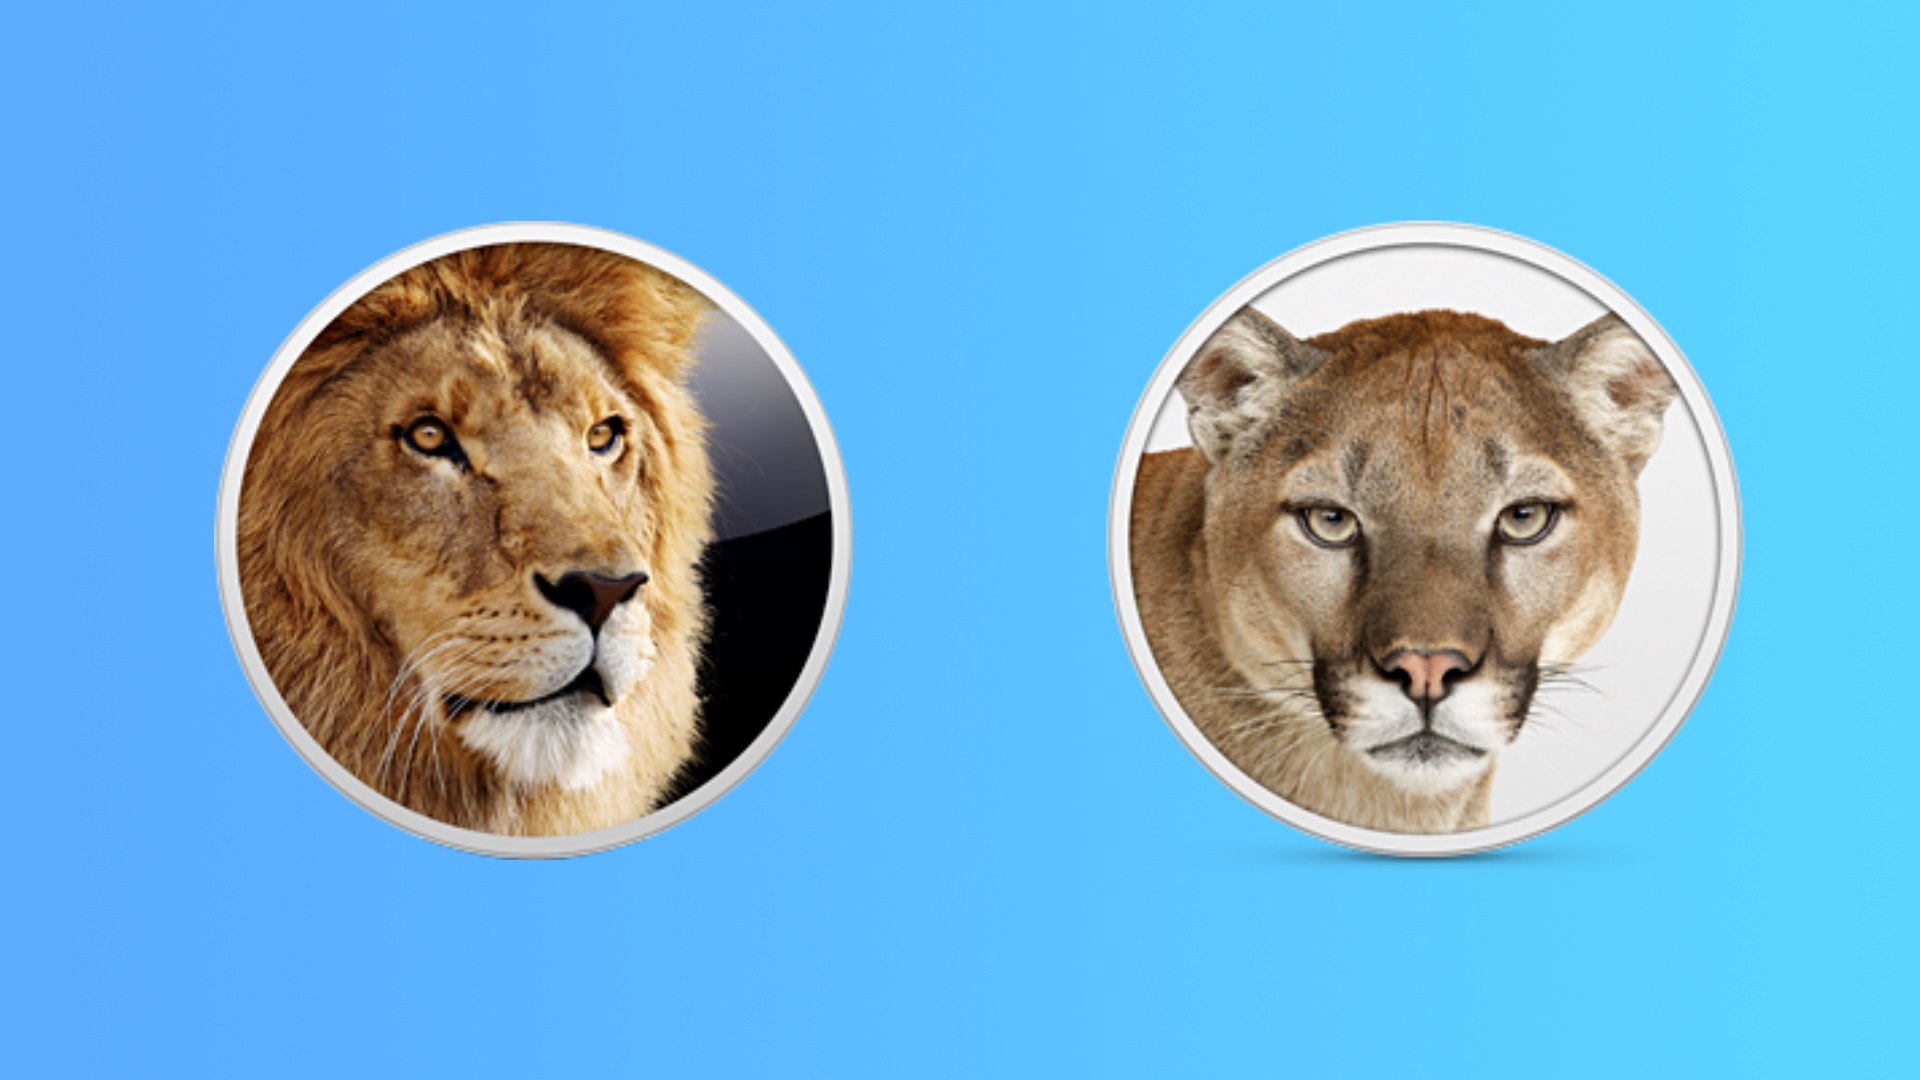 mac os x lion image for vmware